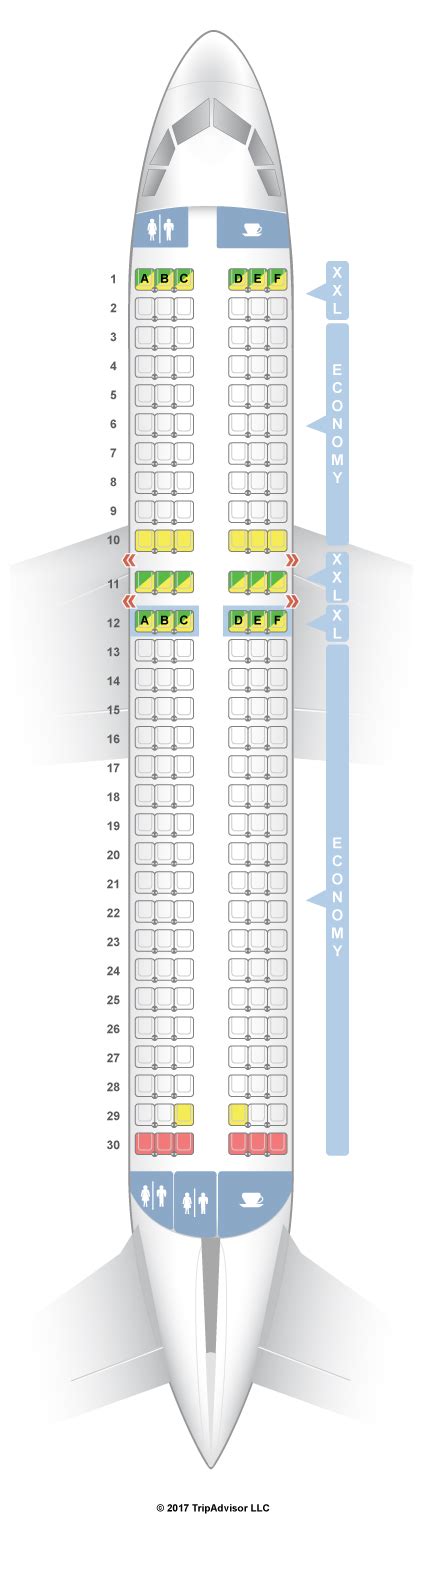 Avianca Airbus A320 Seating Chart My XXX Hot Girl